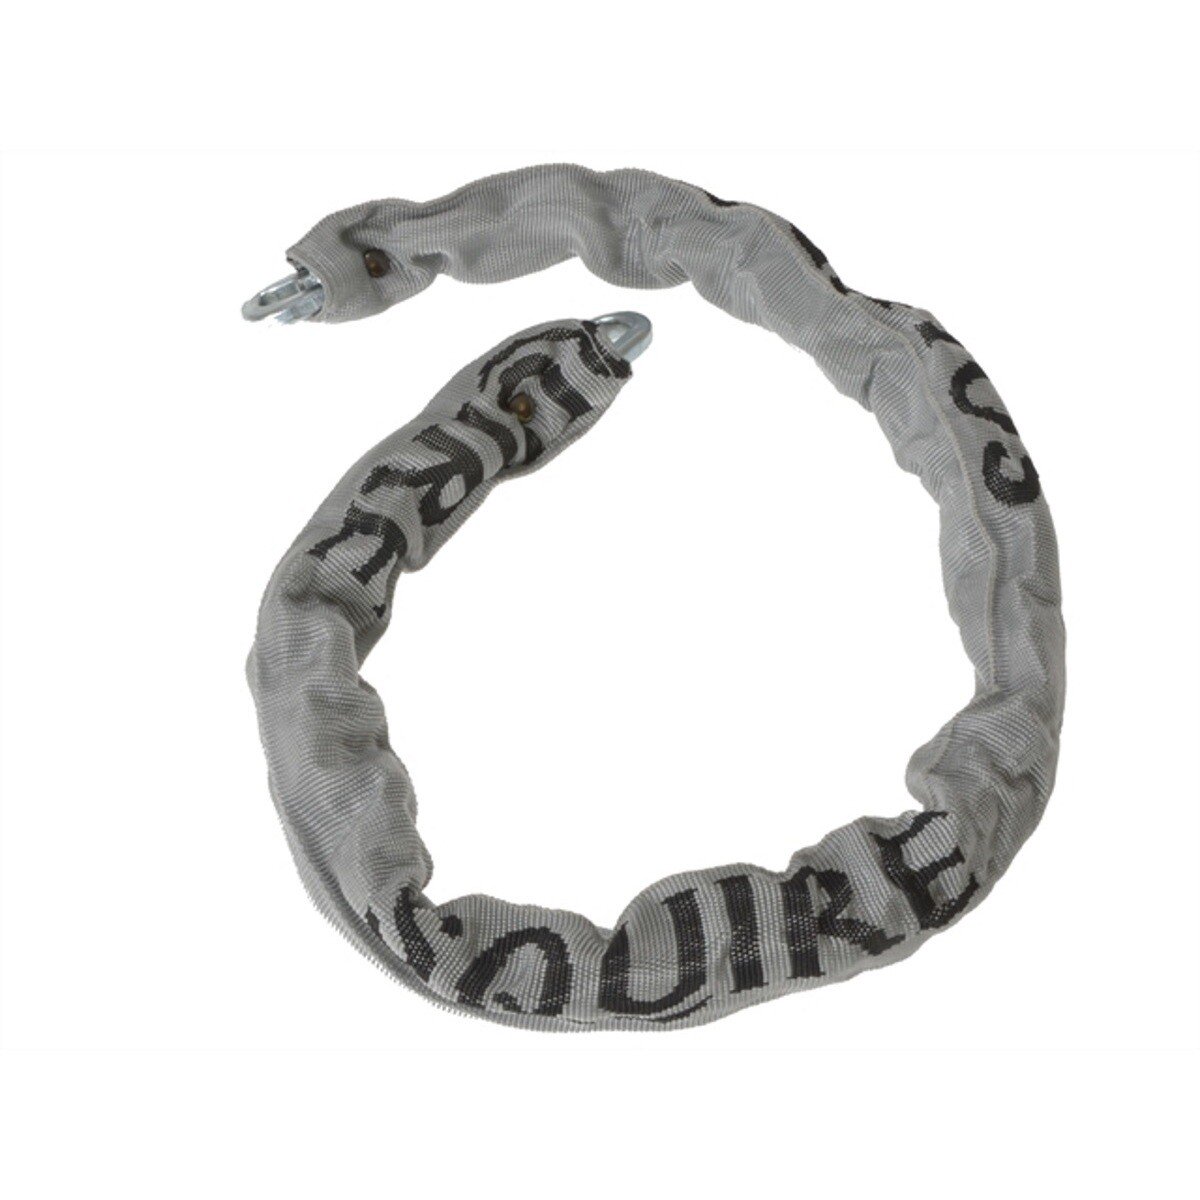 Squire X3 Square Section Hard Chain 900 x 8mm HSQX3